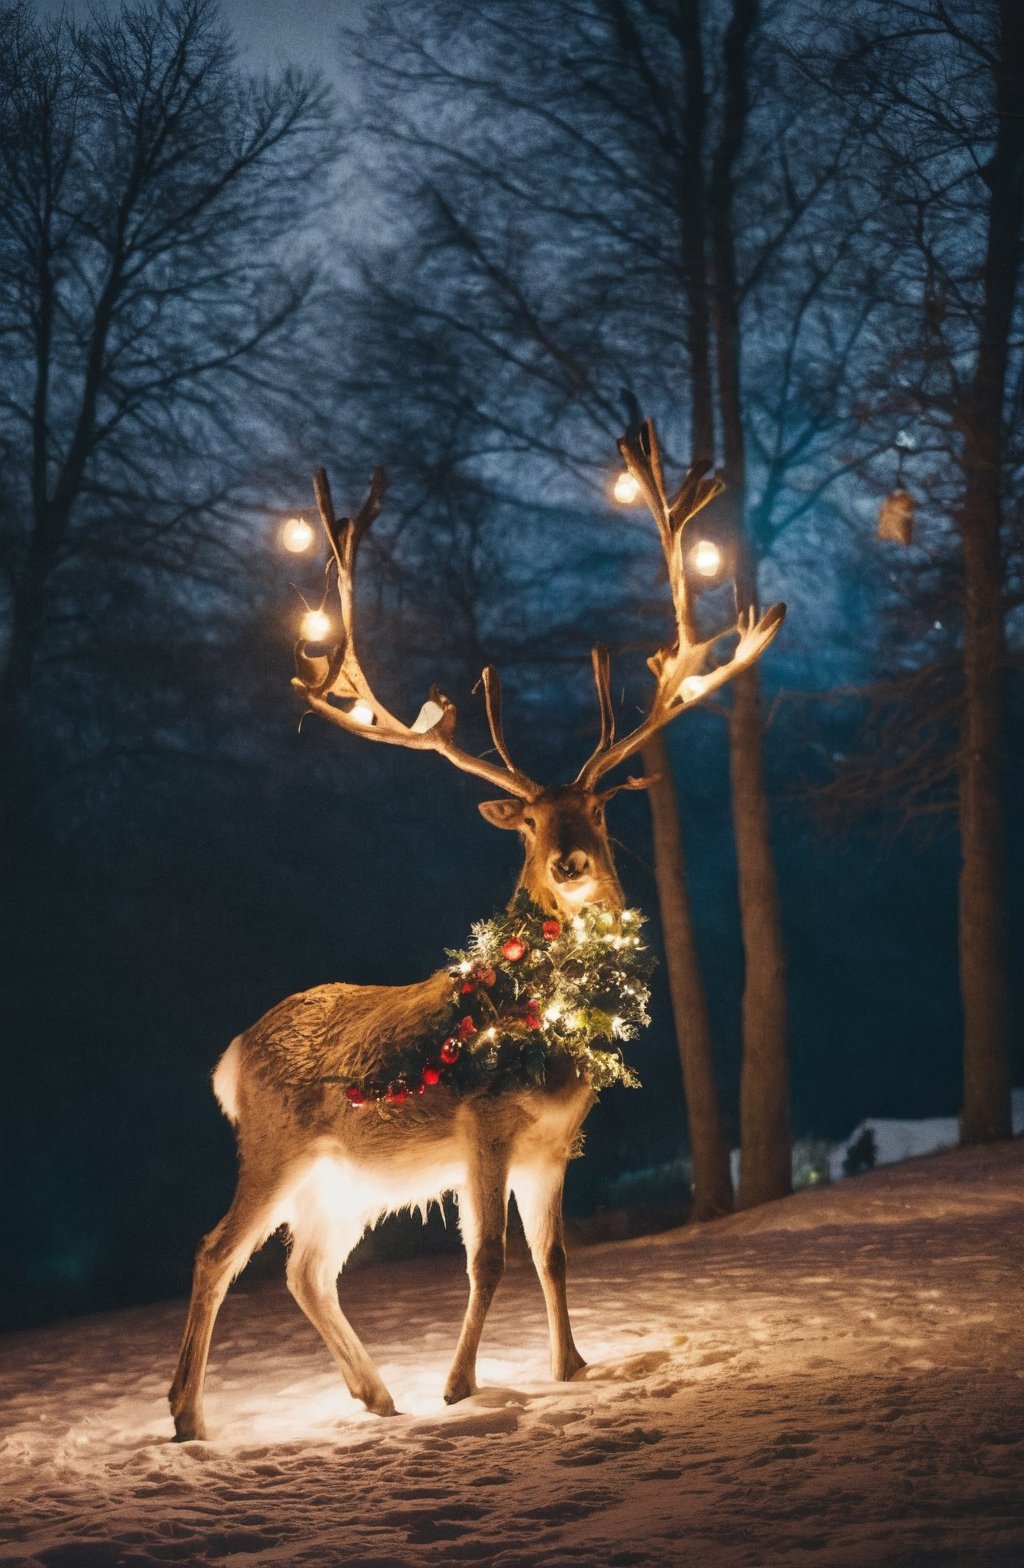 Instagram Image, Decorated tree, Atmospheric, Night, Realistic, Gifts, lights, Cinematic, Real Life, Reindeer
Animal, Santa Clause, Still Film Shot